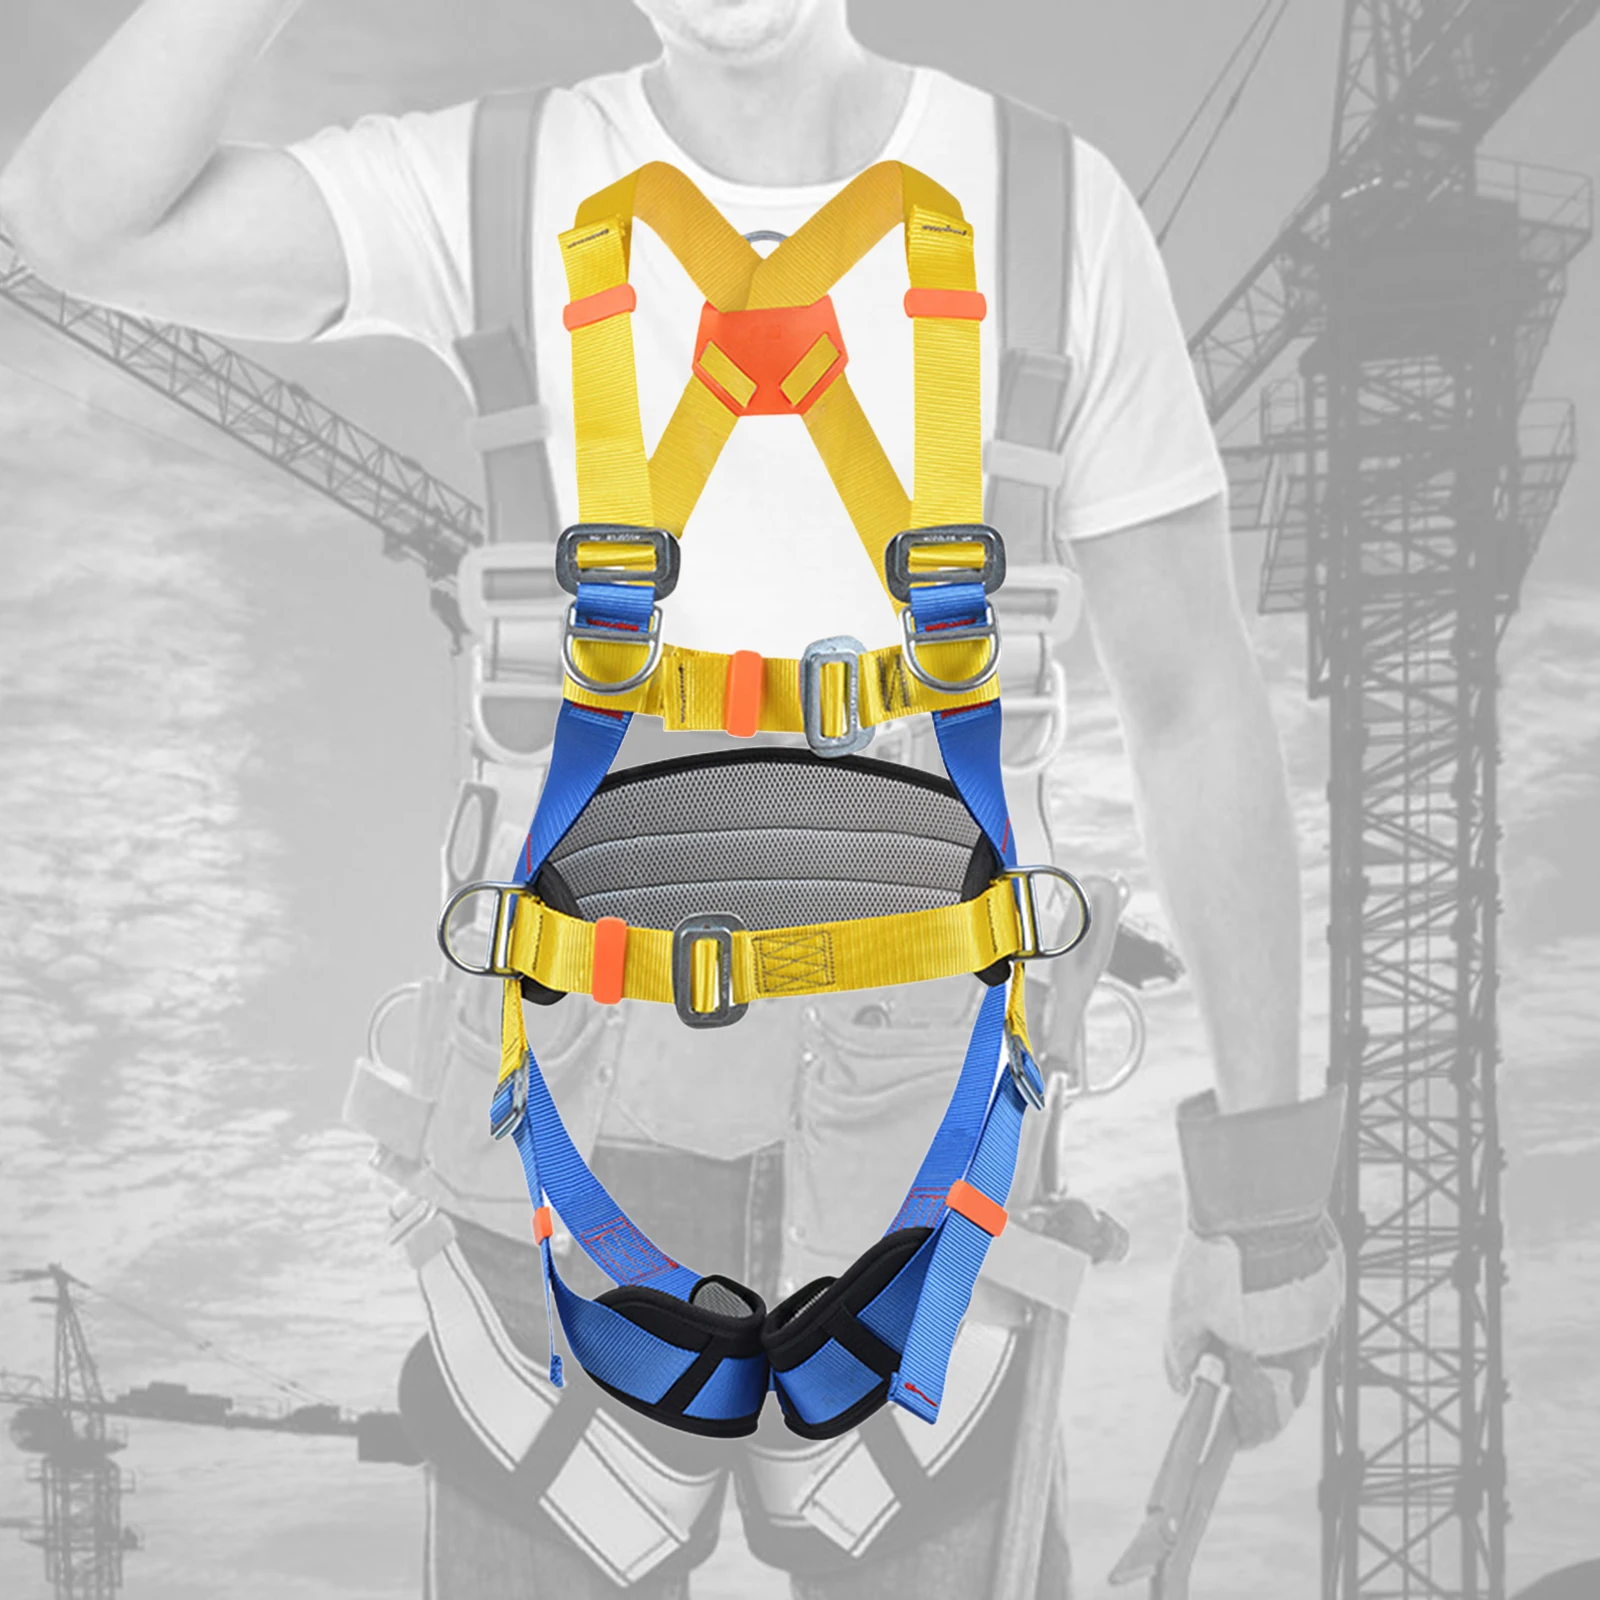 Thicken Climbing Safety Harness Wider Full Body Harness for Mountaineering Rock Tree Climbing Rappelling Tree Climbing Gear